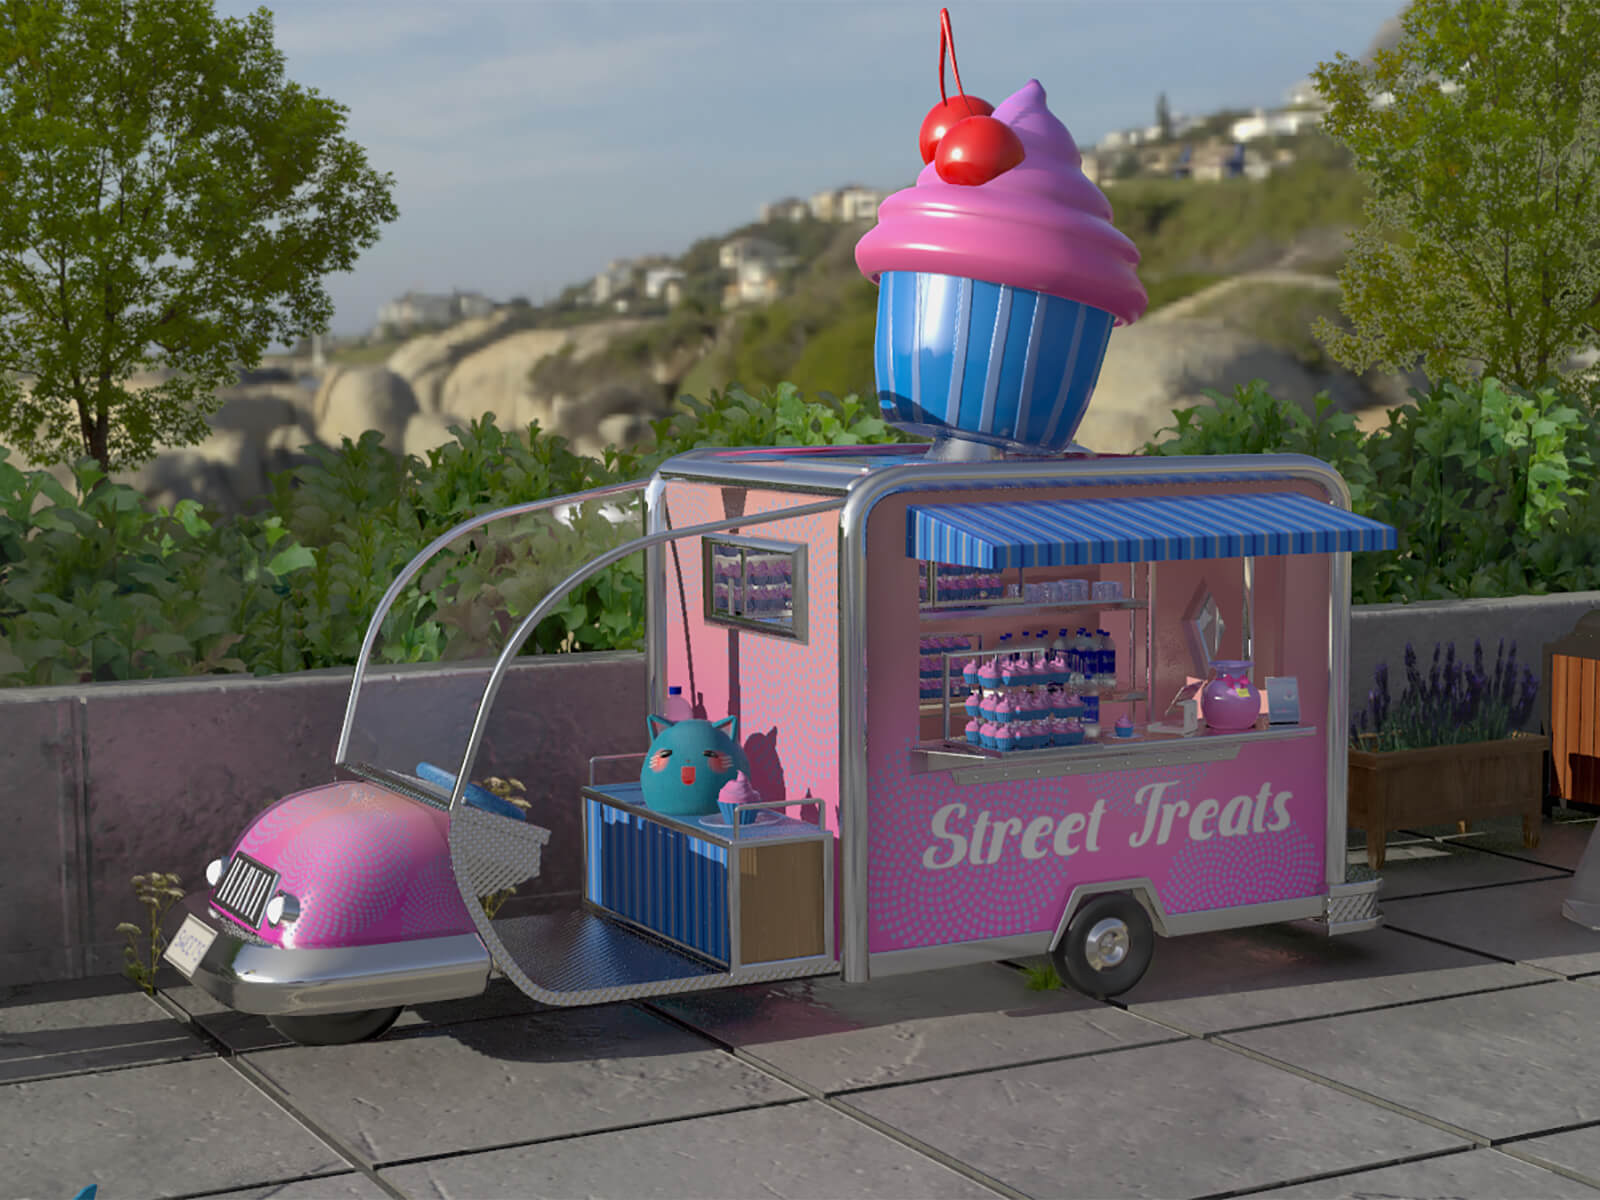 A food truck called "Street Treats" with a giant cupcake on its roof